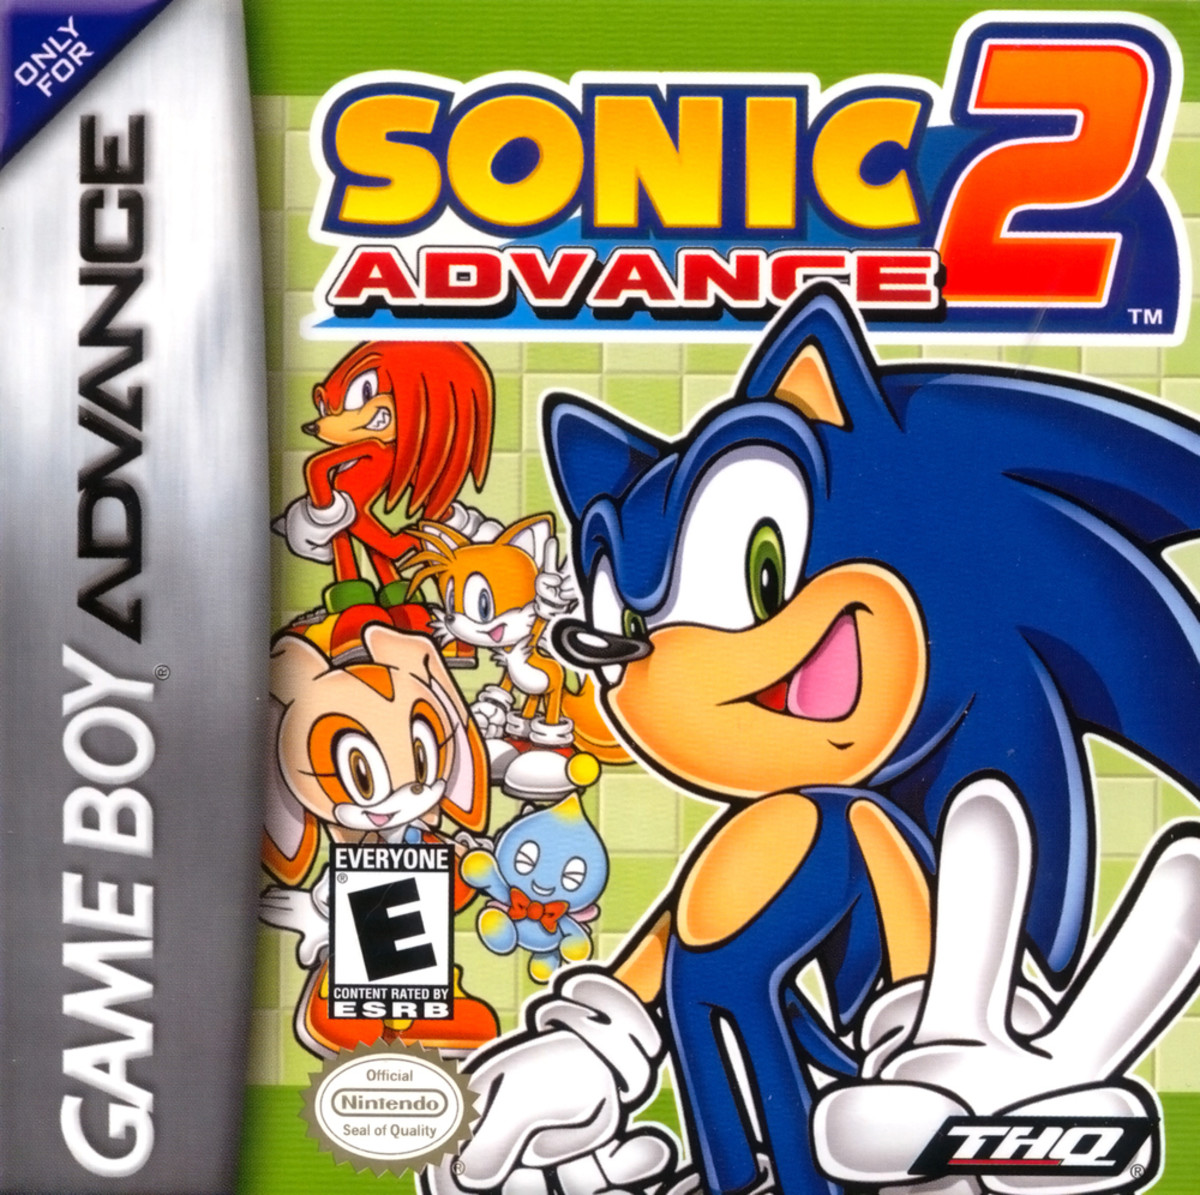 "Sonic Advance 2" GameBoy Advance Cover